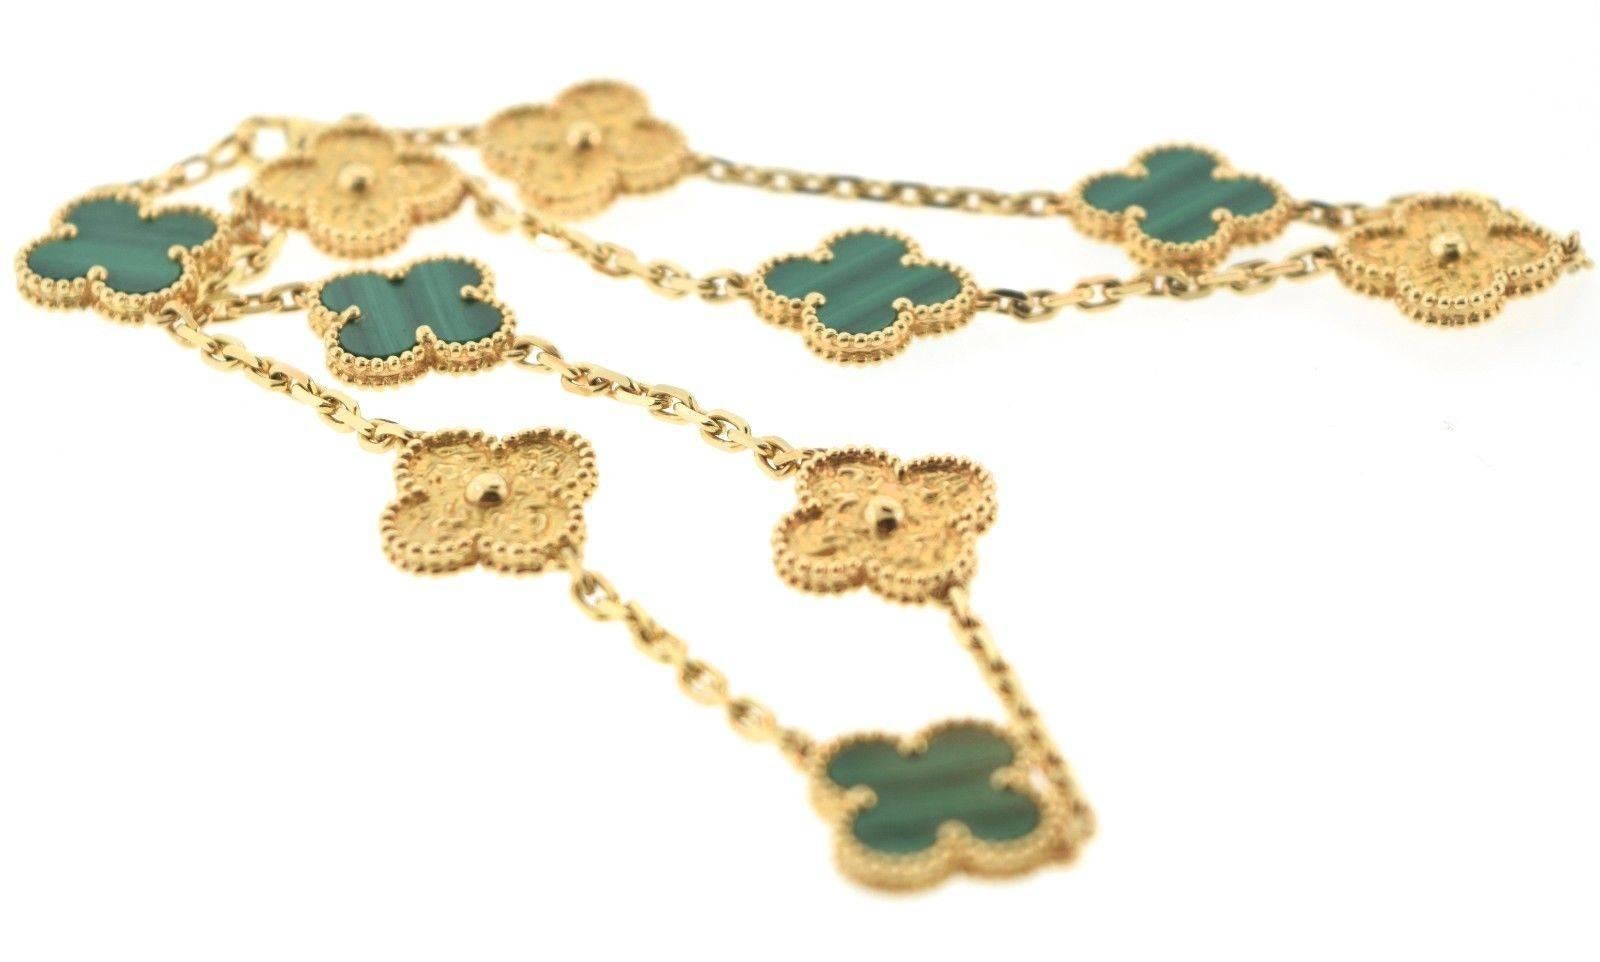 Van Cleef & Arpels Special Edition Alhambra MultiColor 10 Motif 

About the Item:
Van Cleef & Arpels’ other golden Alhambra necklace, which comes via Ancient Greece, features malachite. A vibrant green stone, malachite is often attributed with